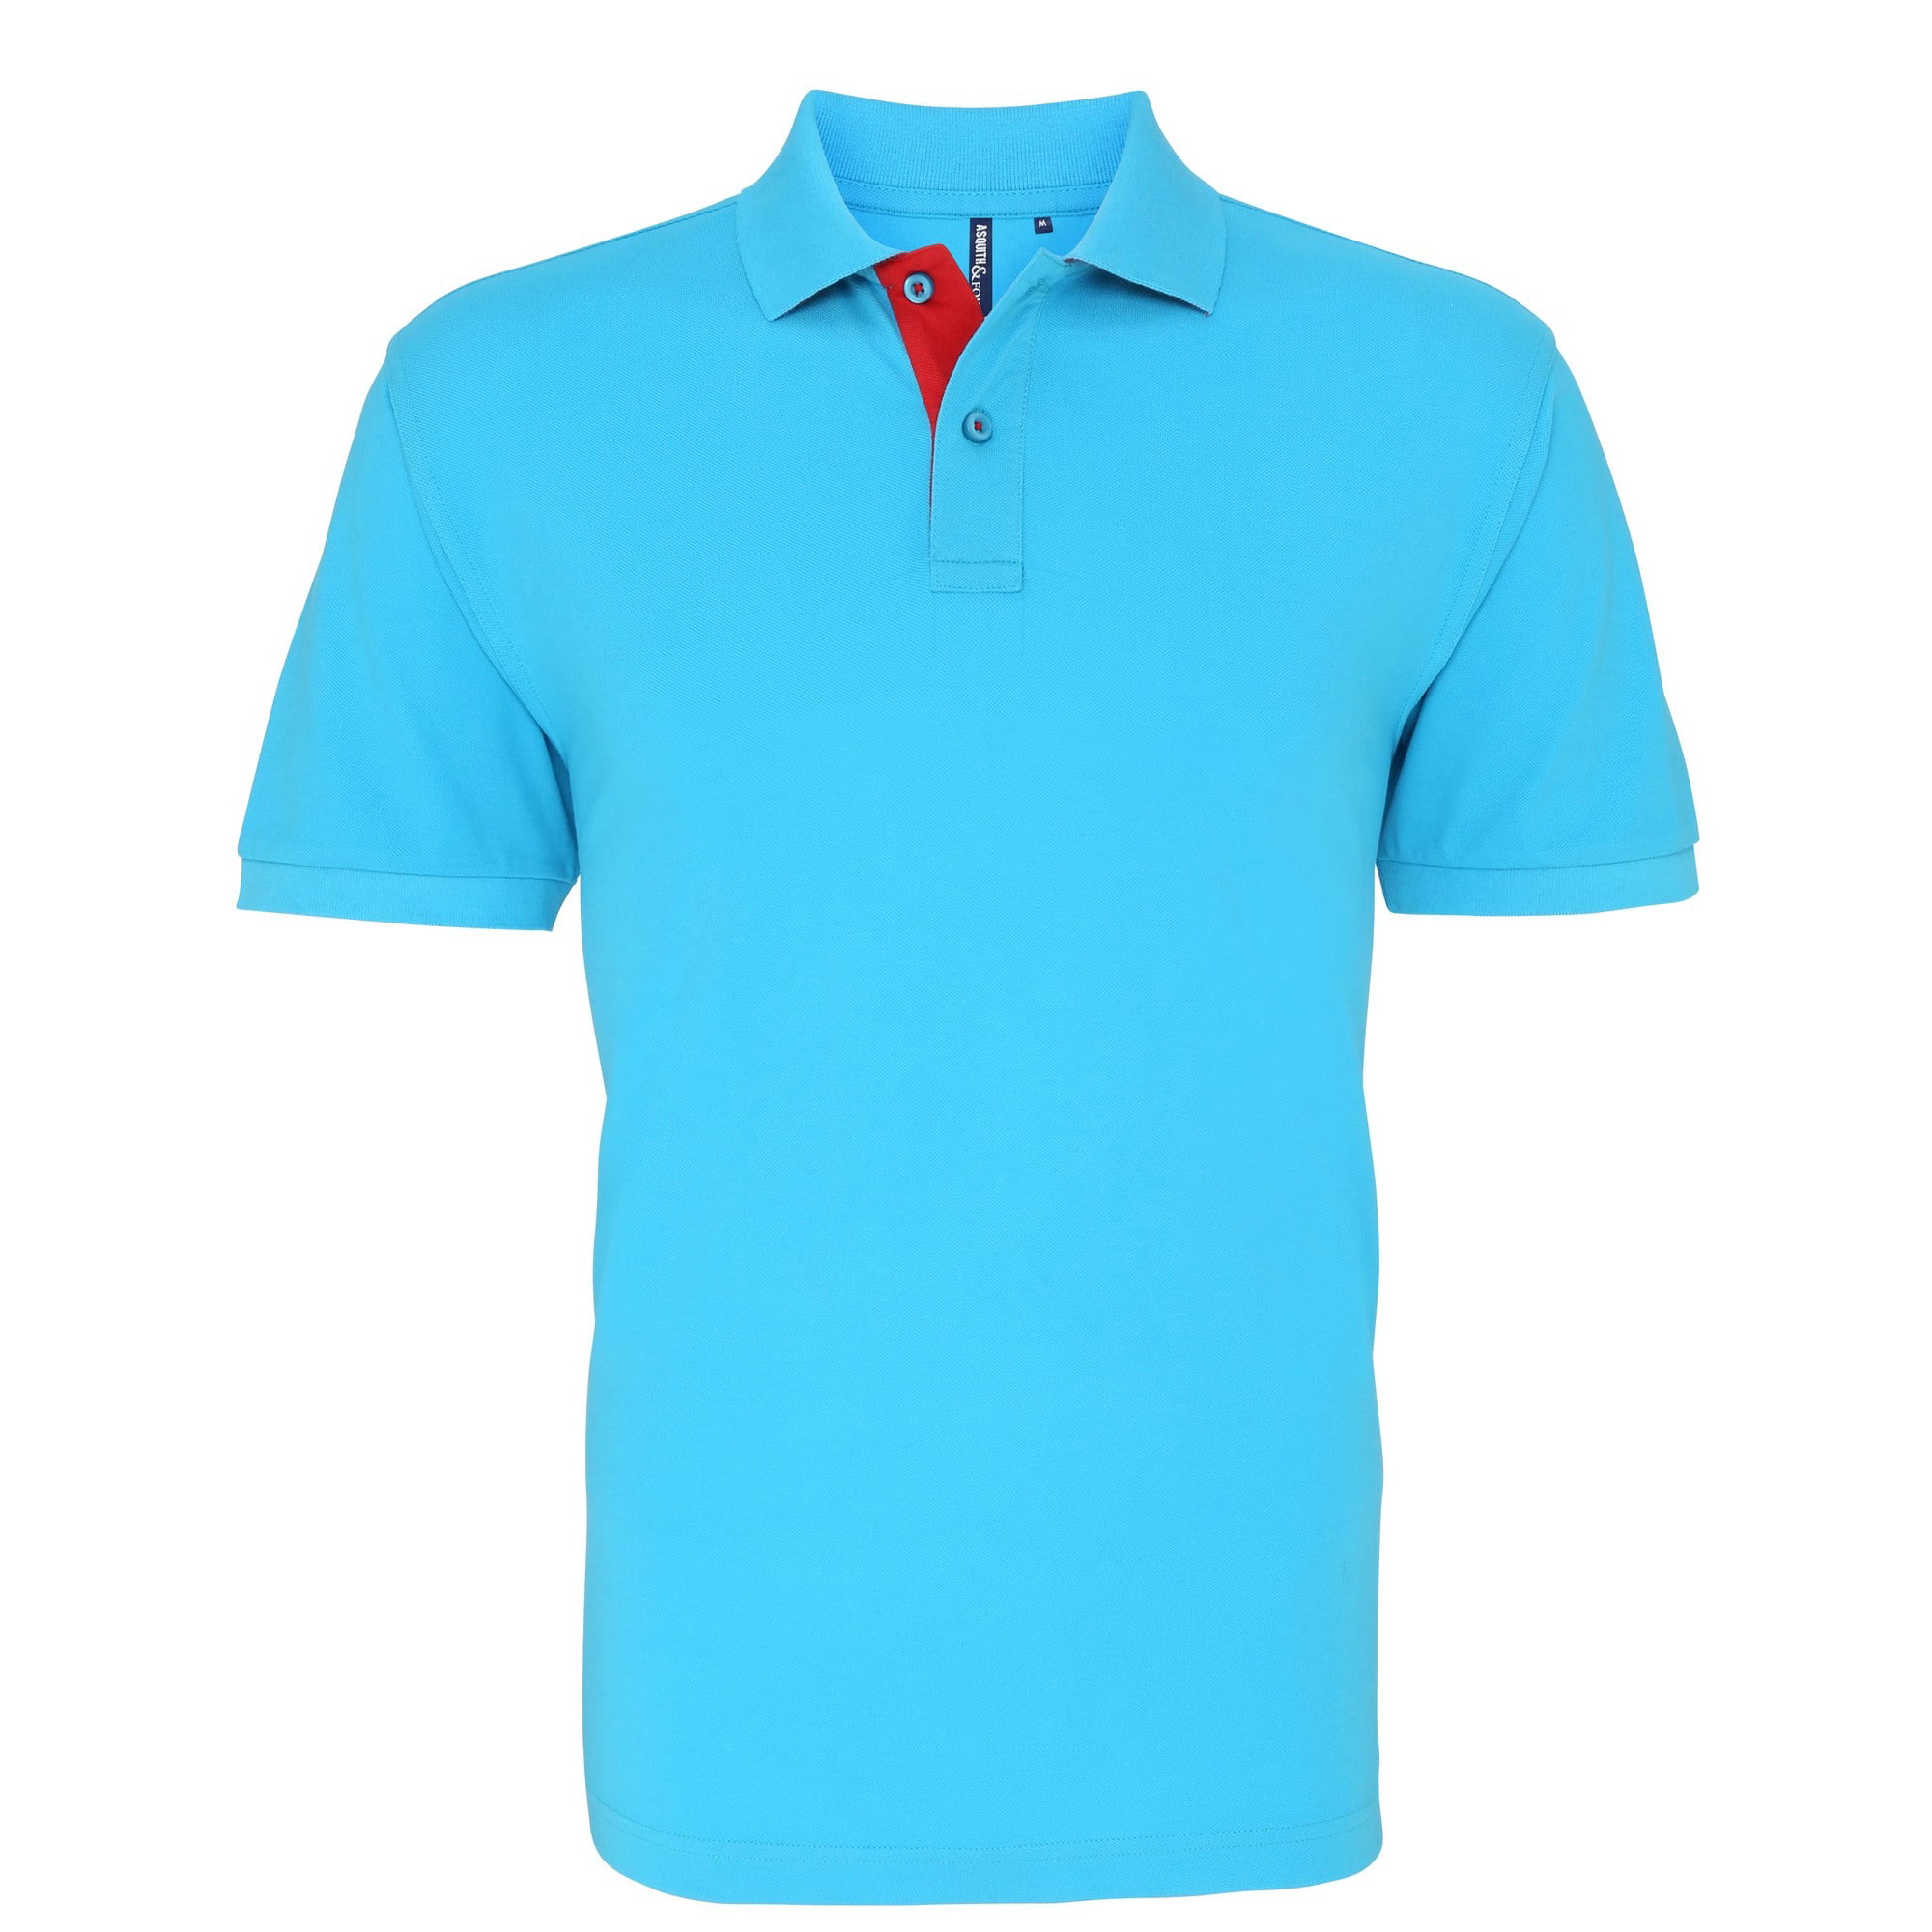 RW4810 Asquith & Fox Mens Classic Fit Contrast Polo Shirt 